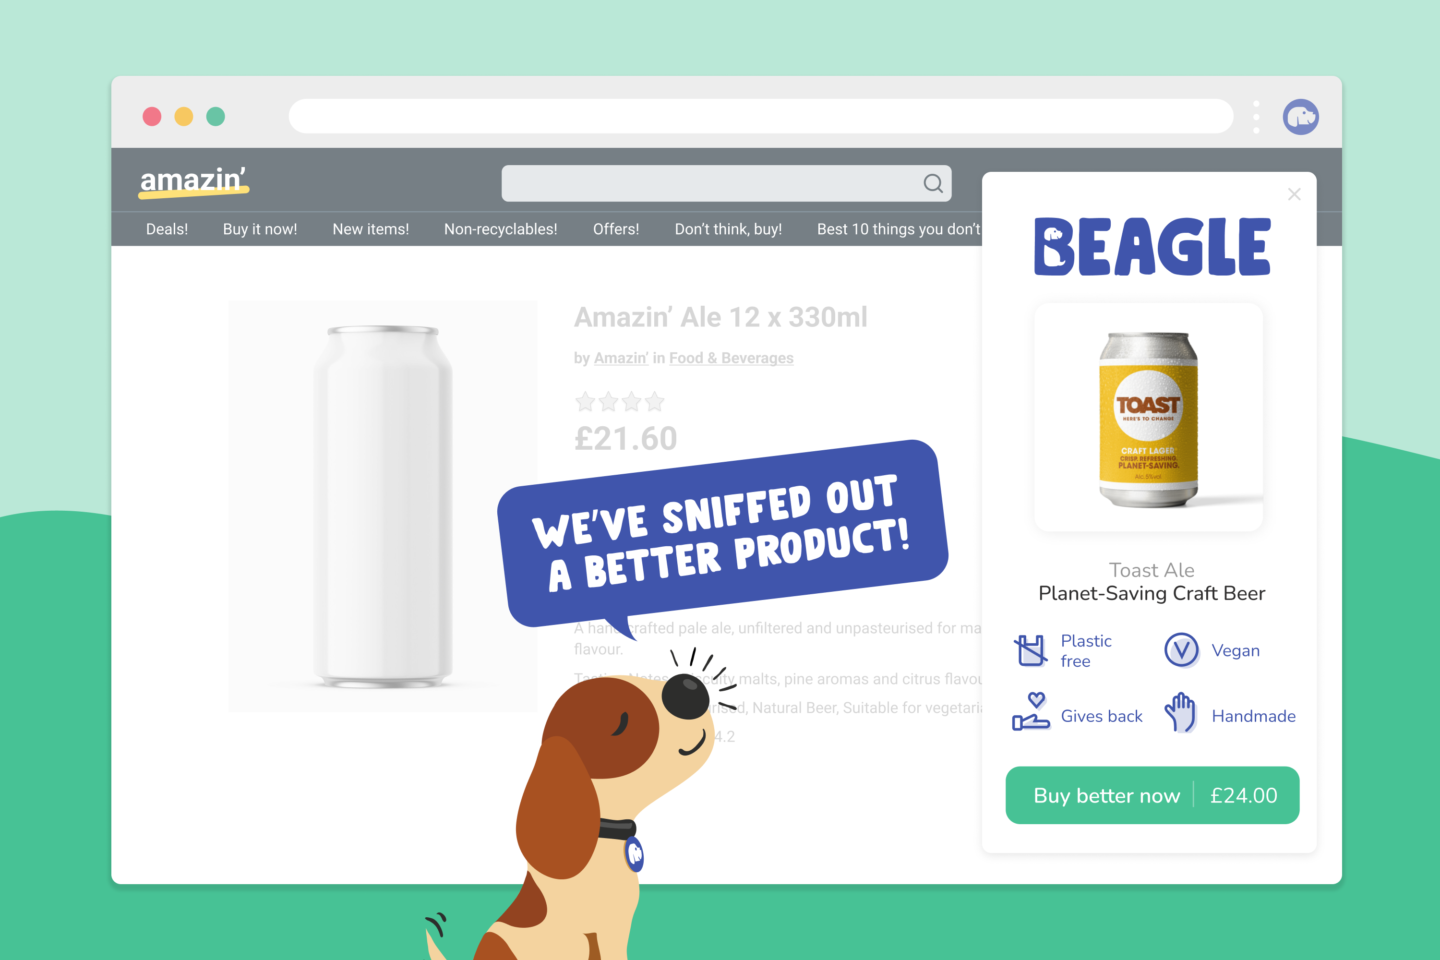 The Beagle Button, Browser Extension, Download, Sustainable Living, Sustainable Shopping, Planet-Friendly, Eco-Friendly, App and Technologies, Shopping Online, Sustainable Brands, the Frenchie Mummy